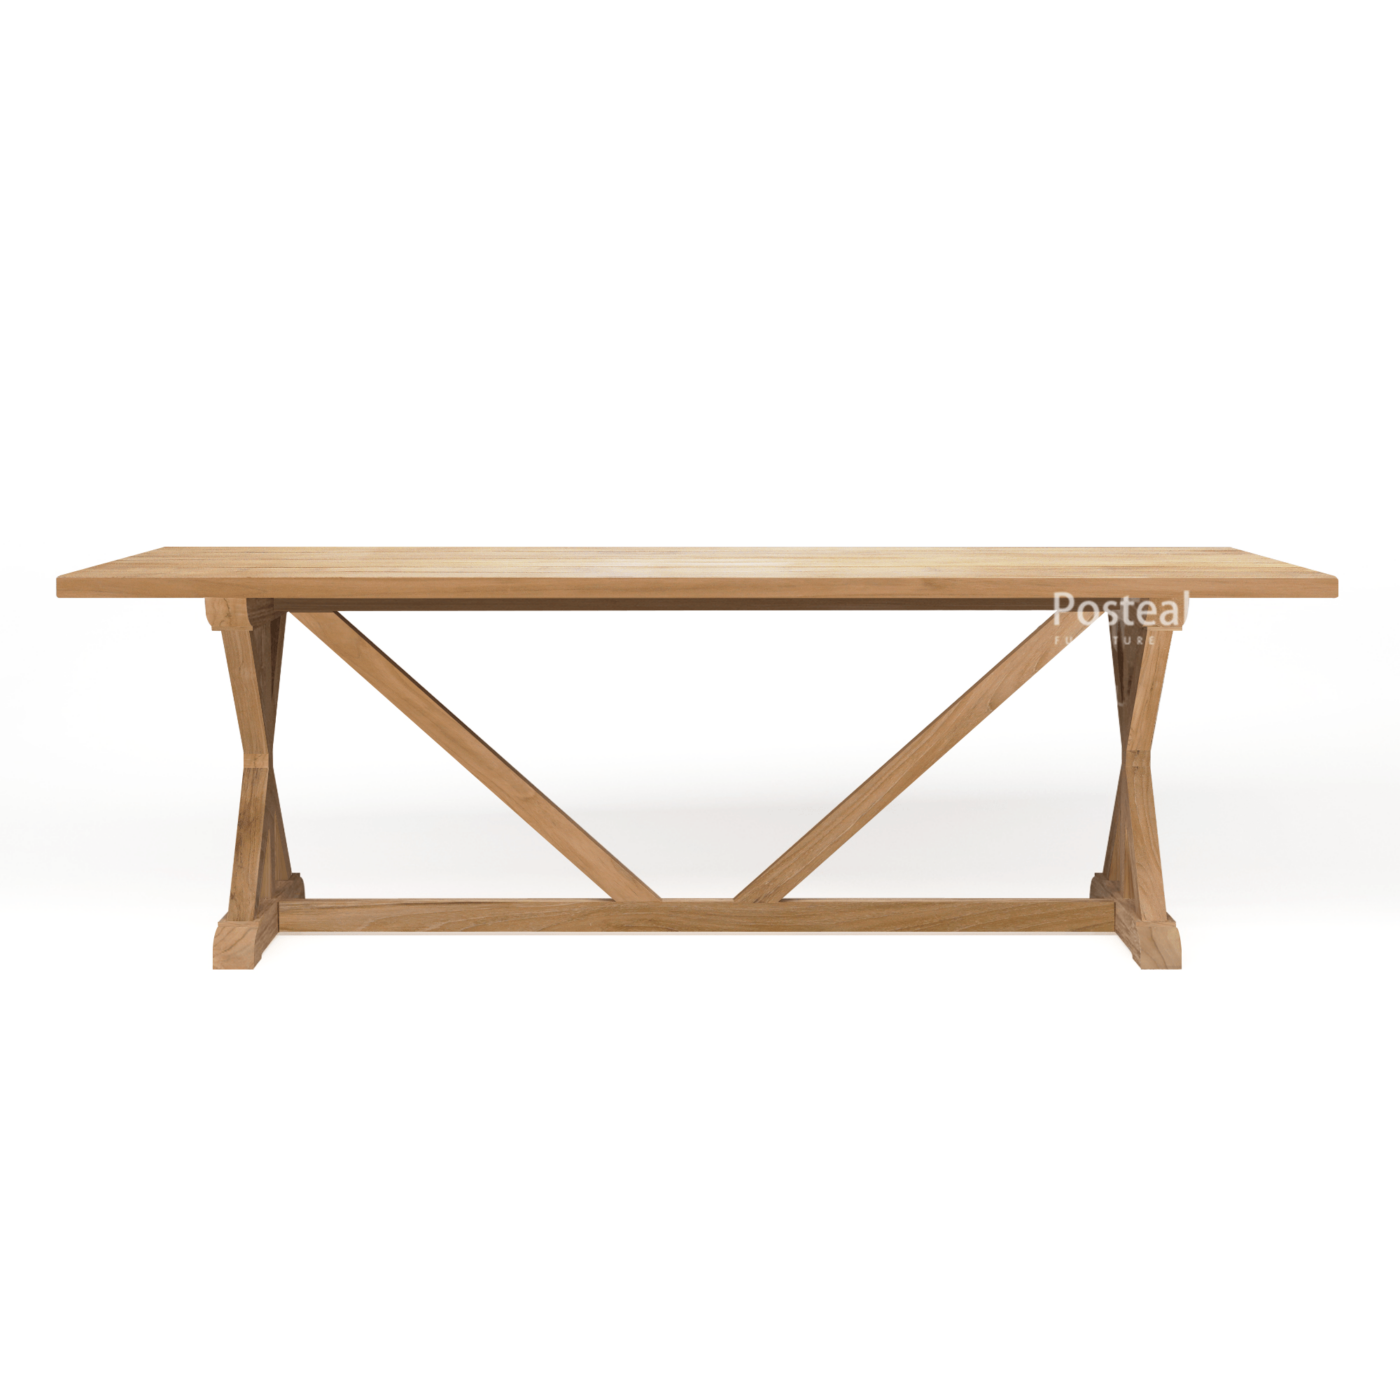 harbor-teak-outdoor-dining-table-front